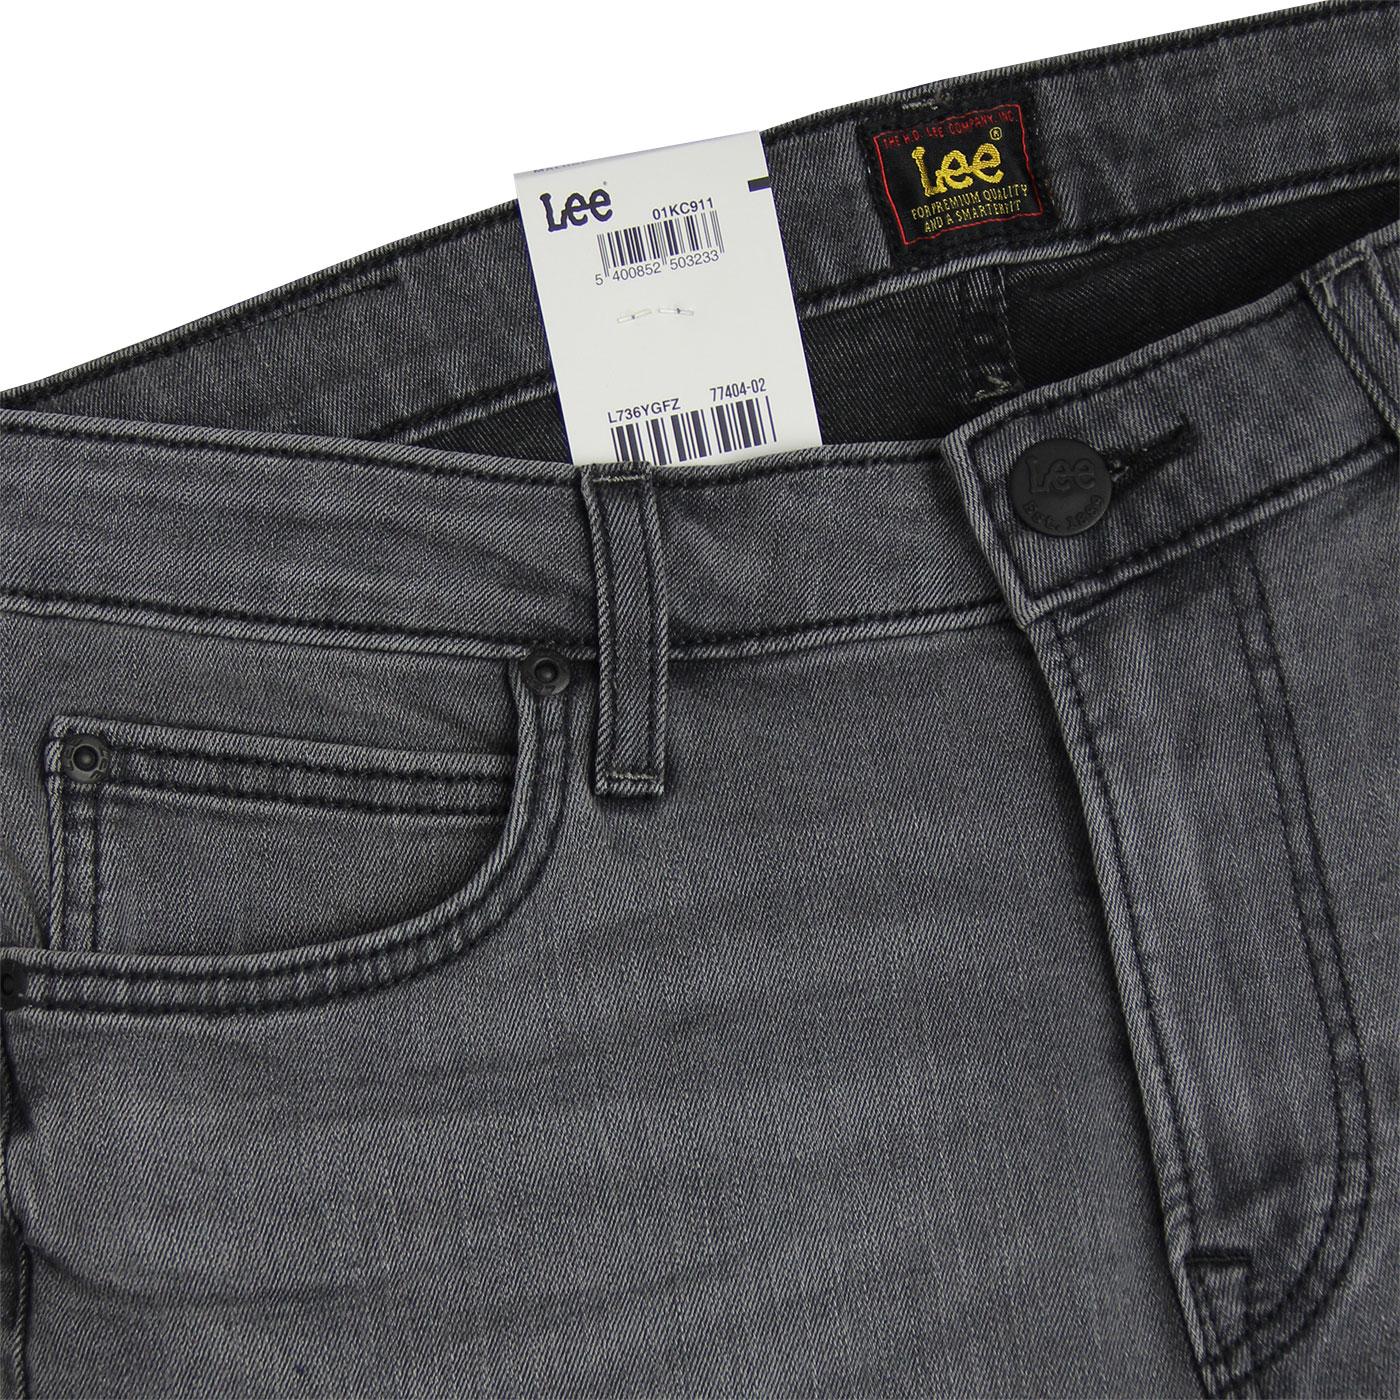 lee jeans malone skinny,www.autoconnective.in